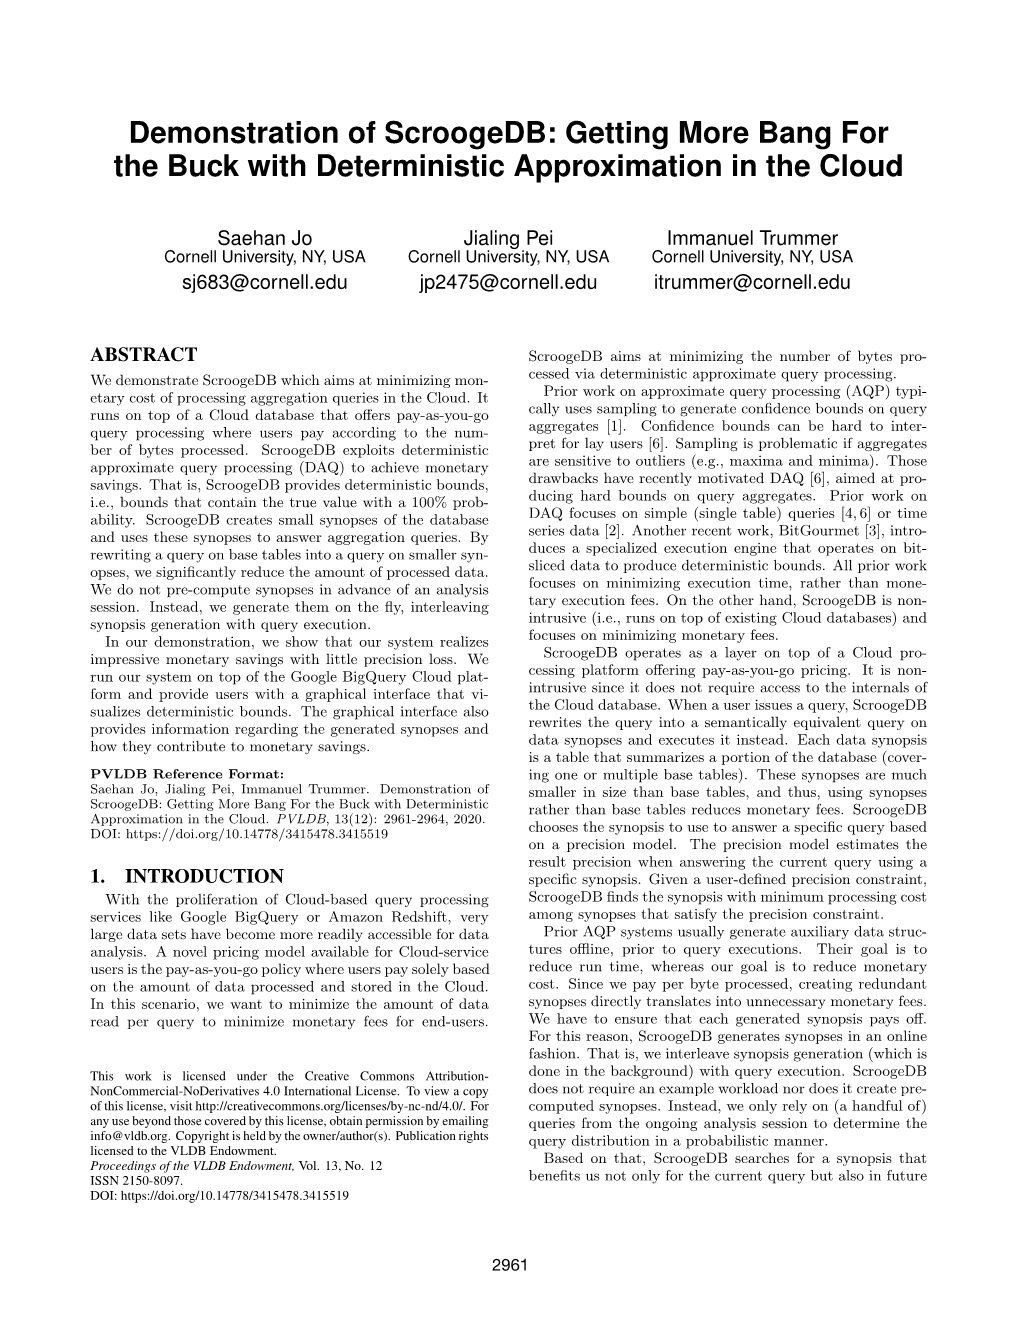 Demonstration of Scroogedb: Getting More Bang for the Buck with Deterministic Approximation in the Cloud